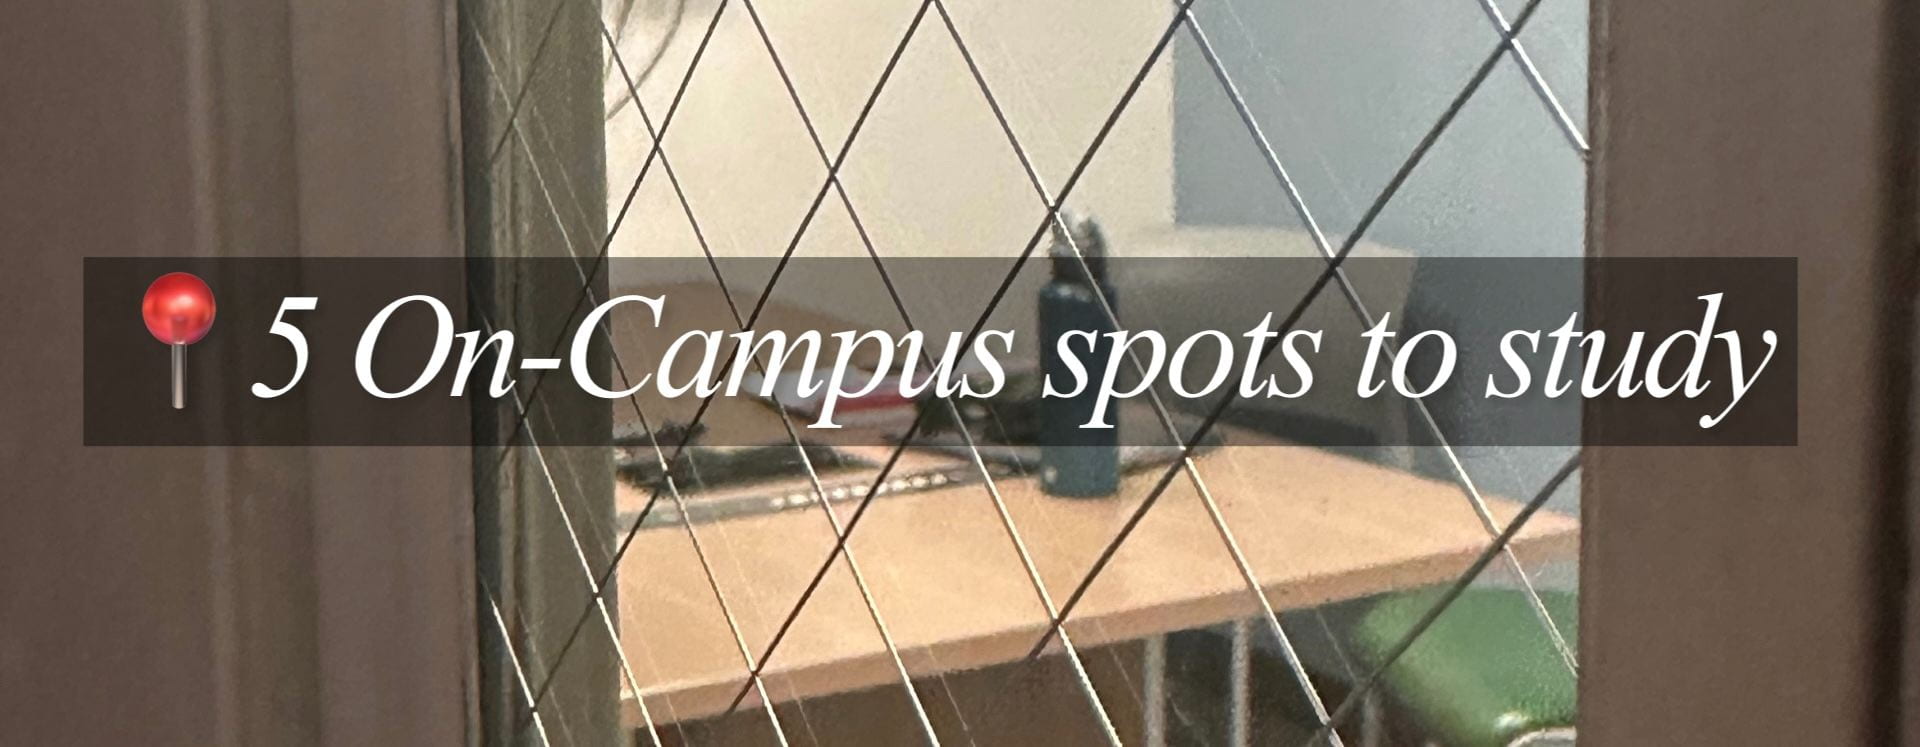 An image with the caption “5 On-Campus spots to study” on it.